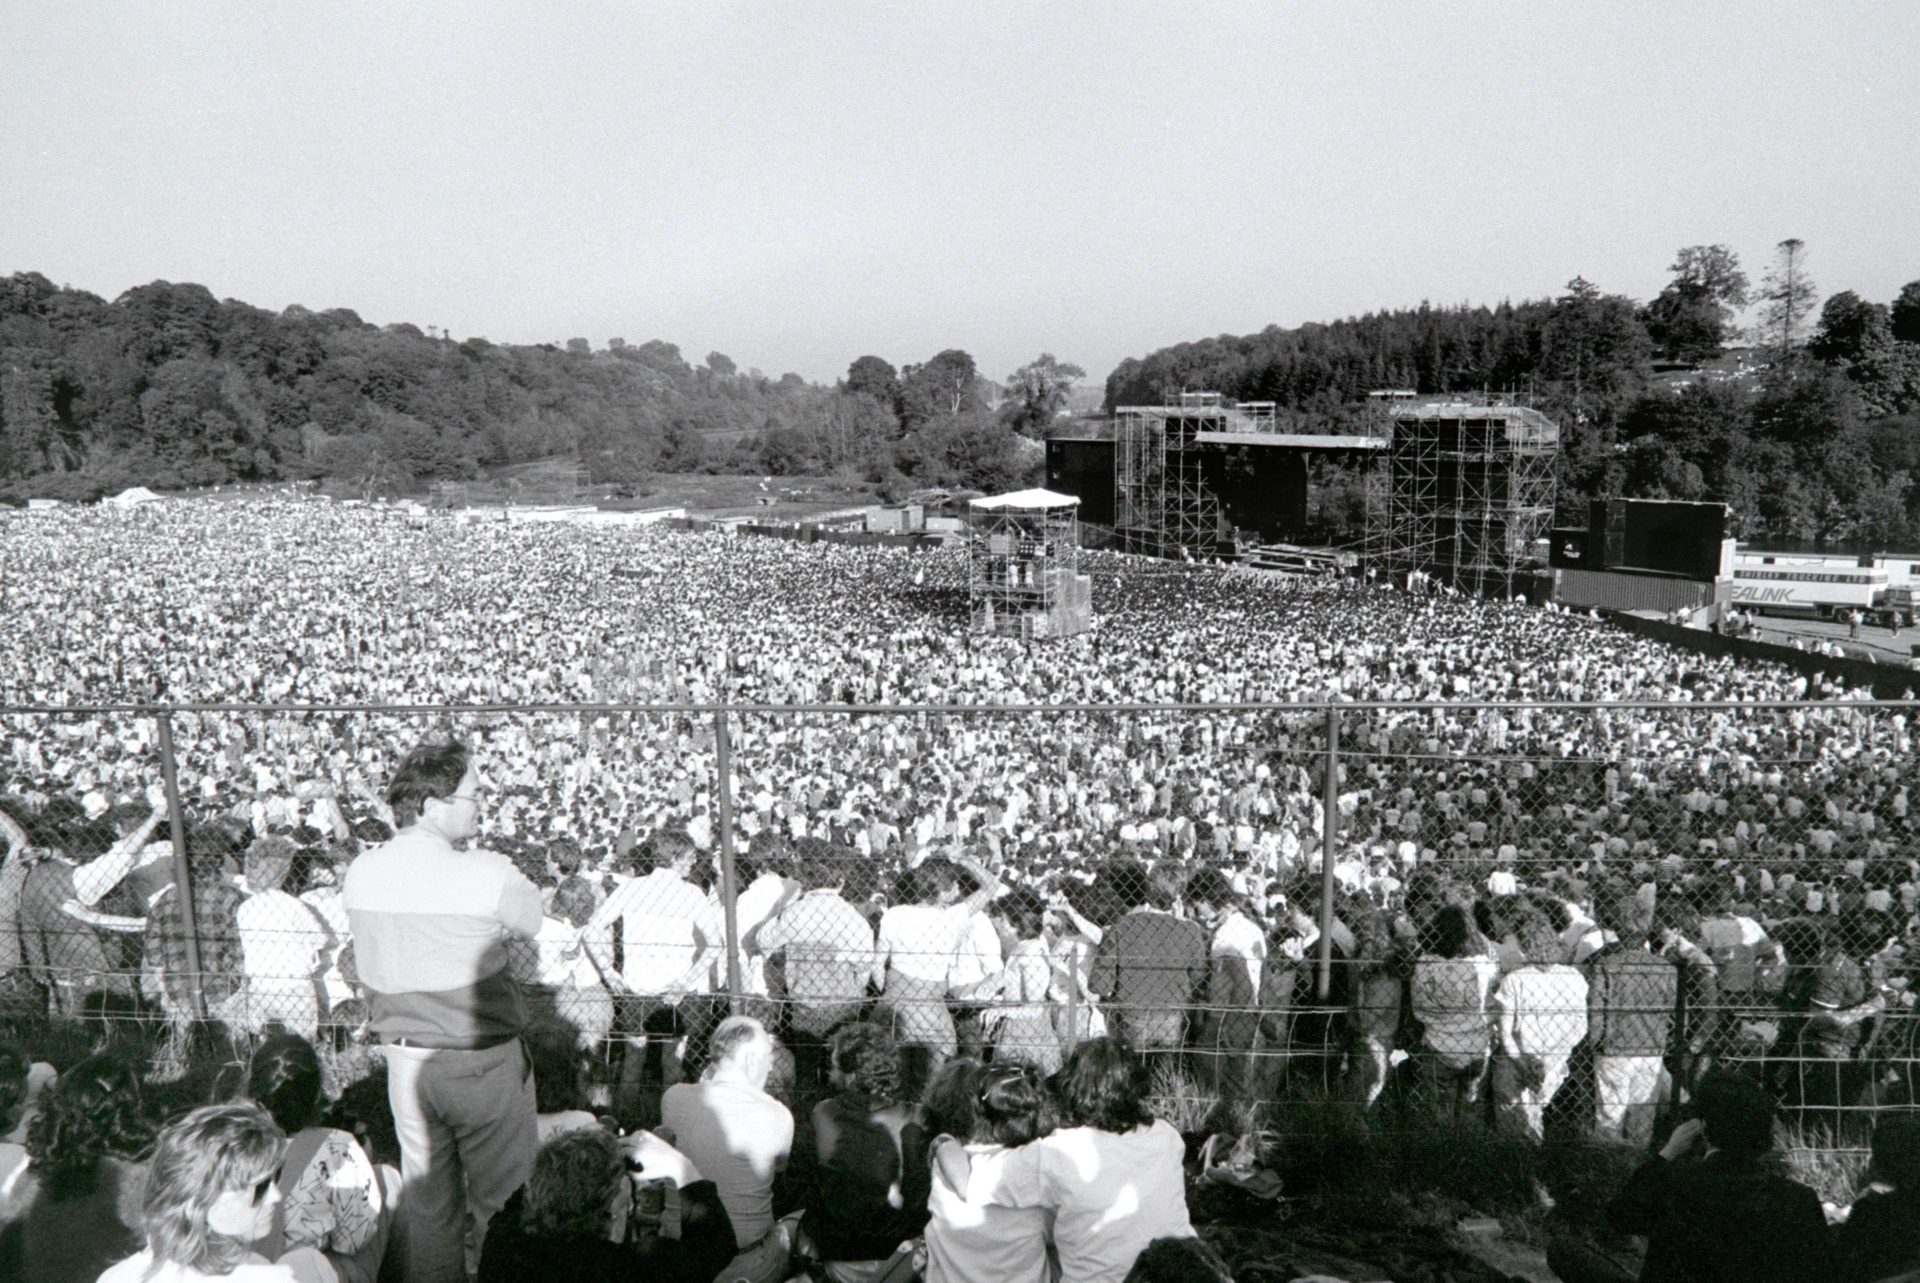 Bruce Springsteen and The E-Streetband performing in  Slane Castle in, Ireland. 01-06-1985. Image: Gerard van Bree / Alamy Stock Photo 